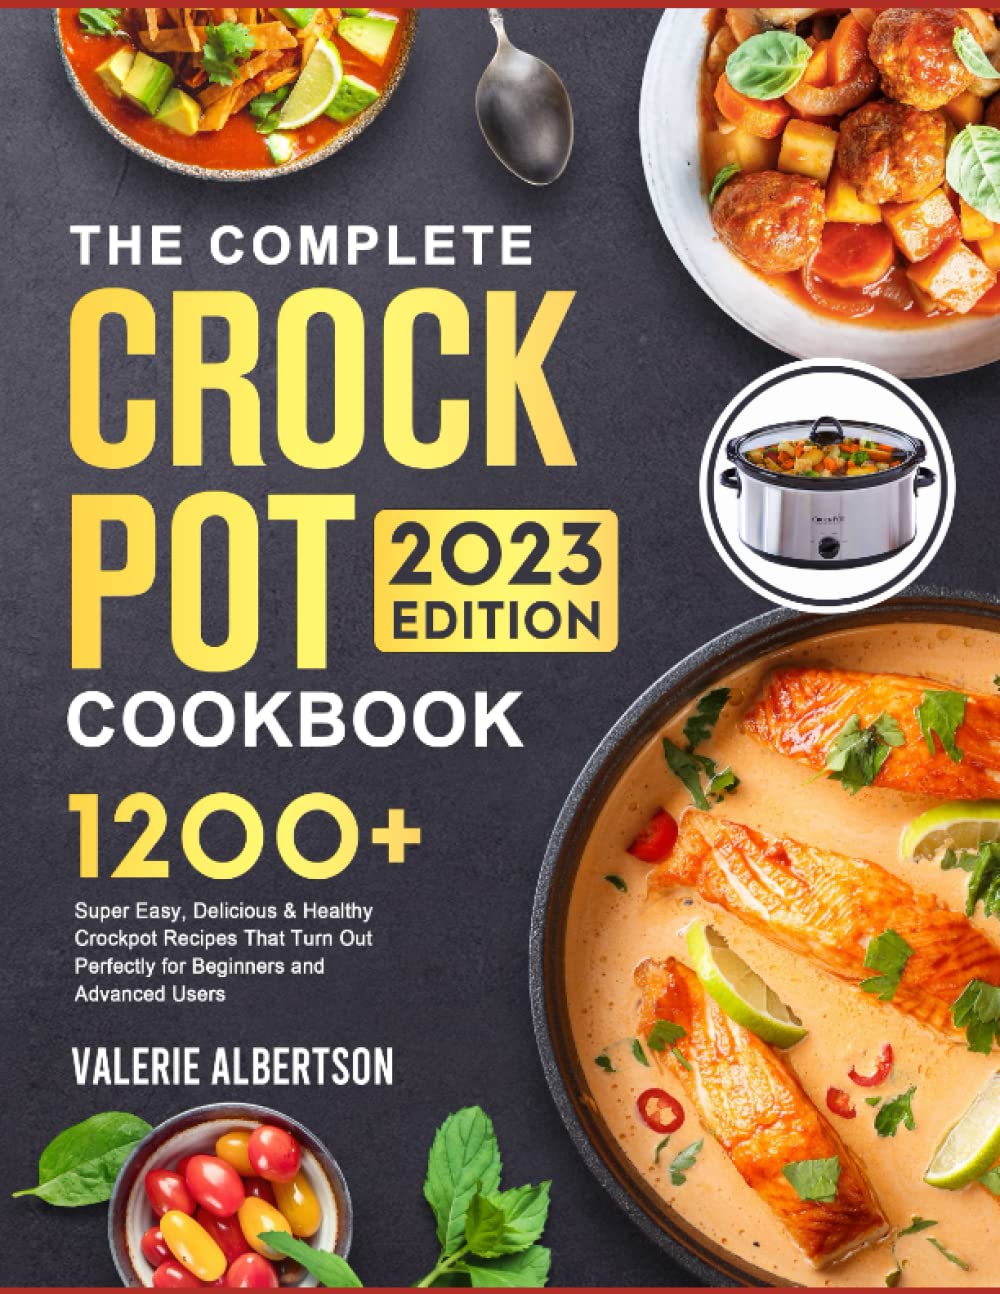 The Complete Crock Pot Cookbook for Beginners 2023: 1200 Super Easy, Delicious & Healthy Crockpot Recipes for Everyday Meals to Live a Healthy Life